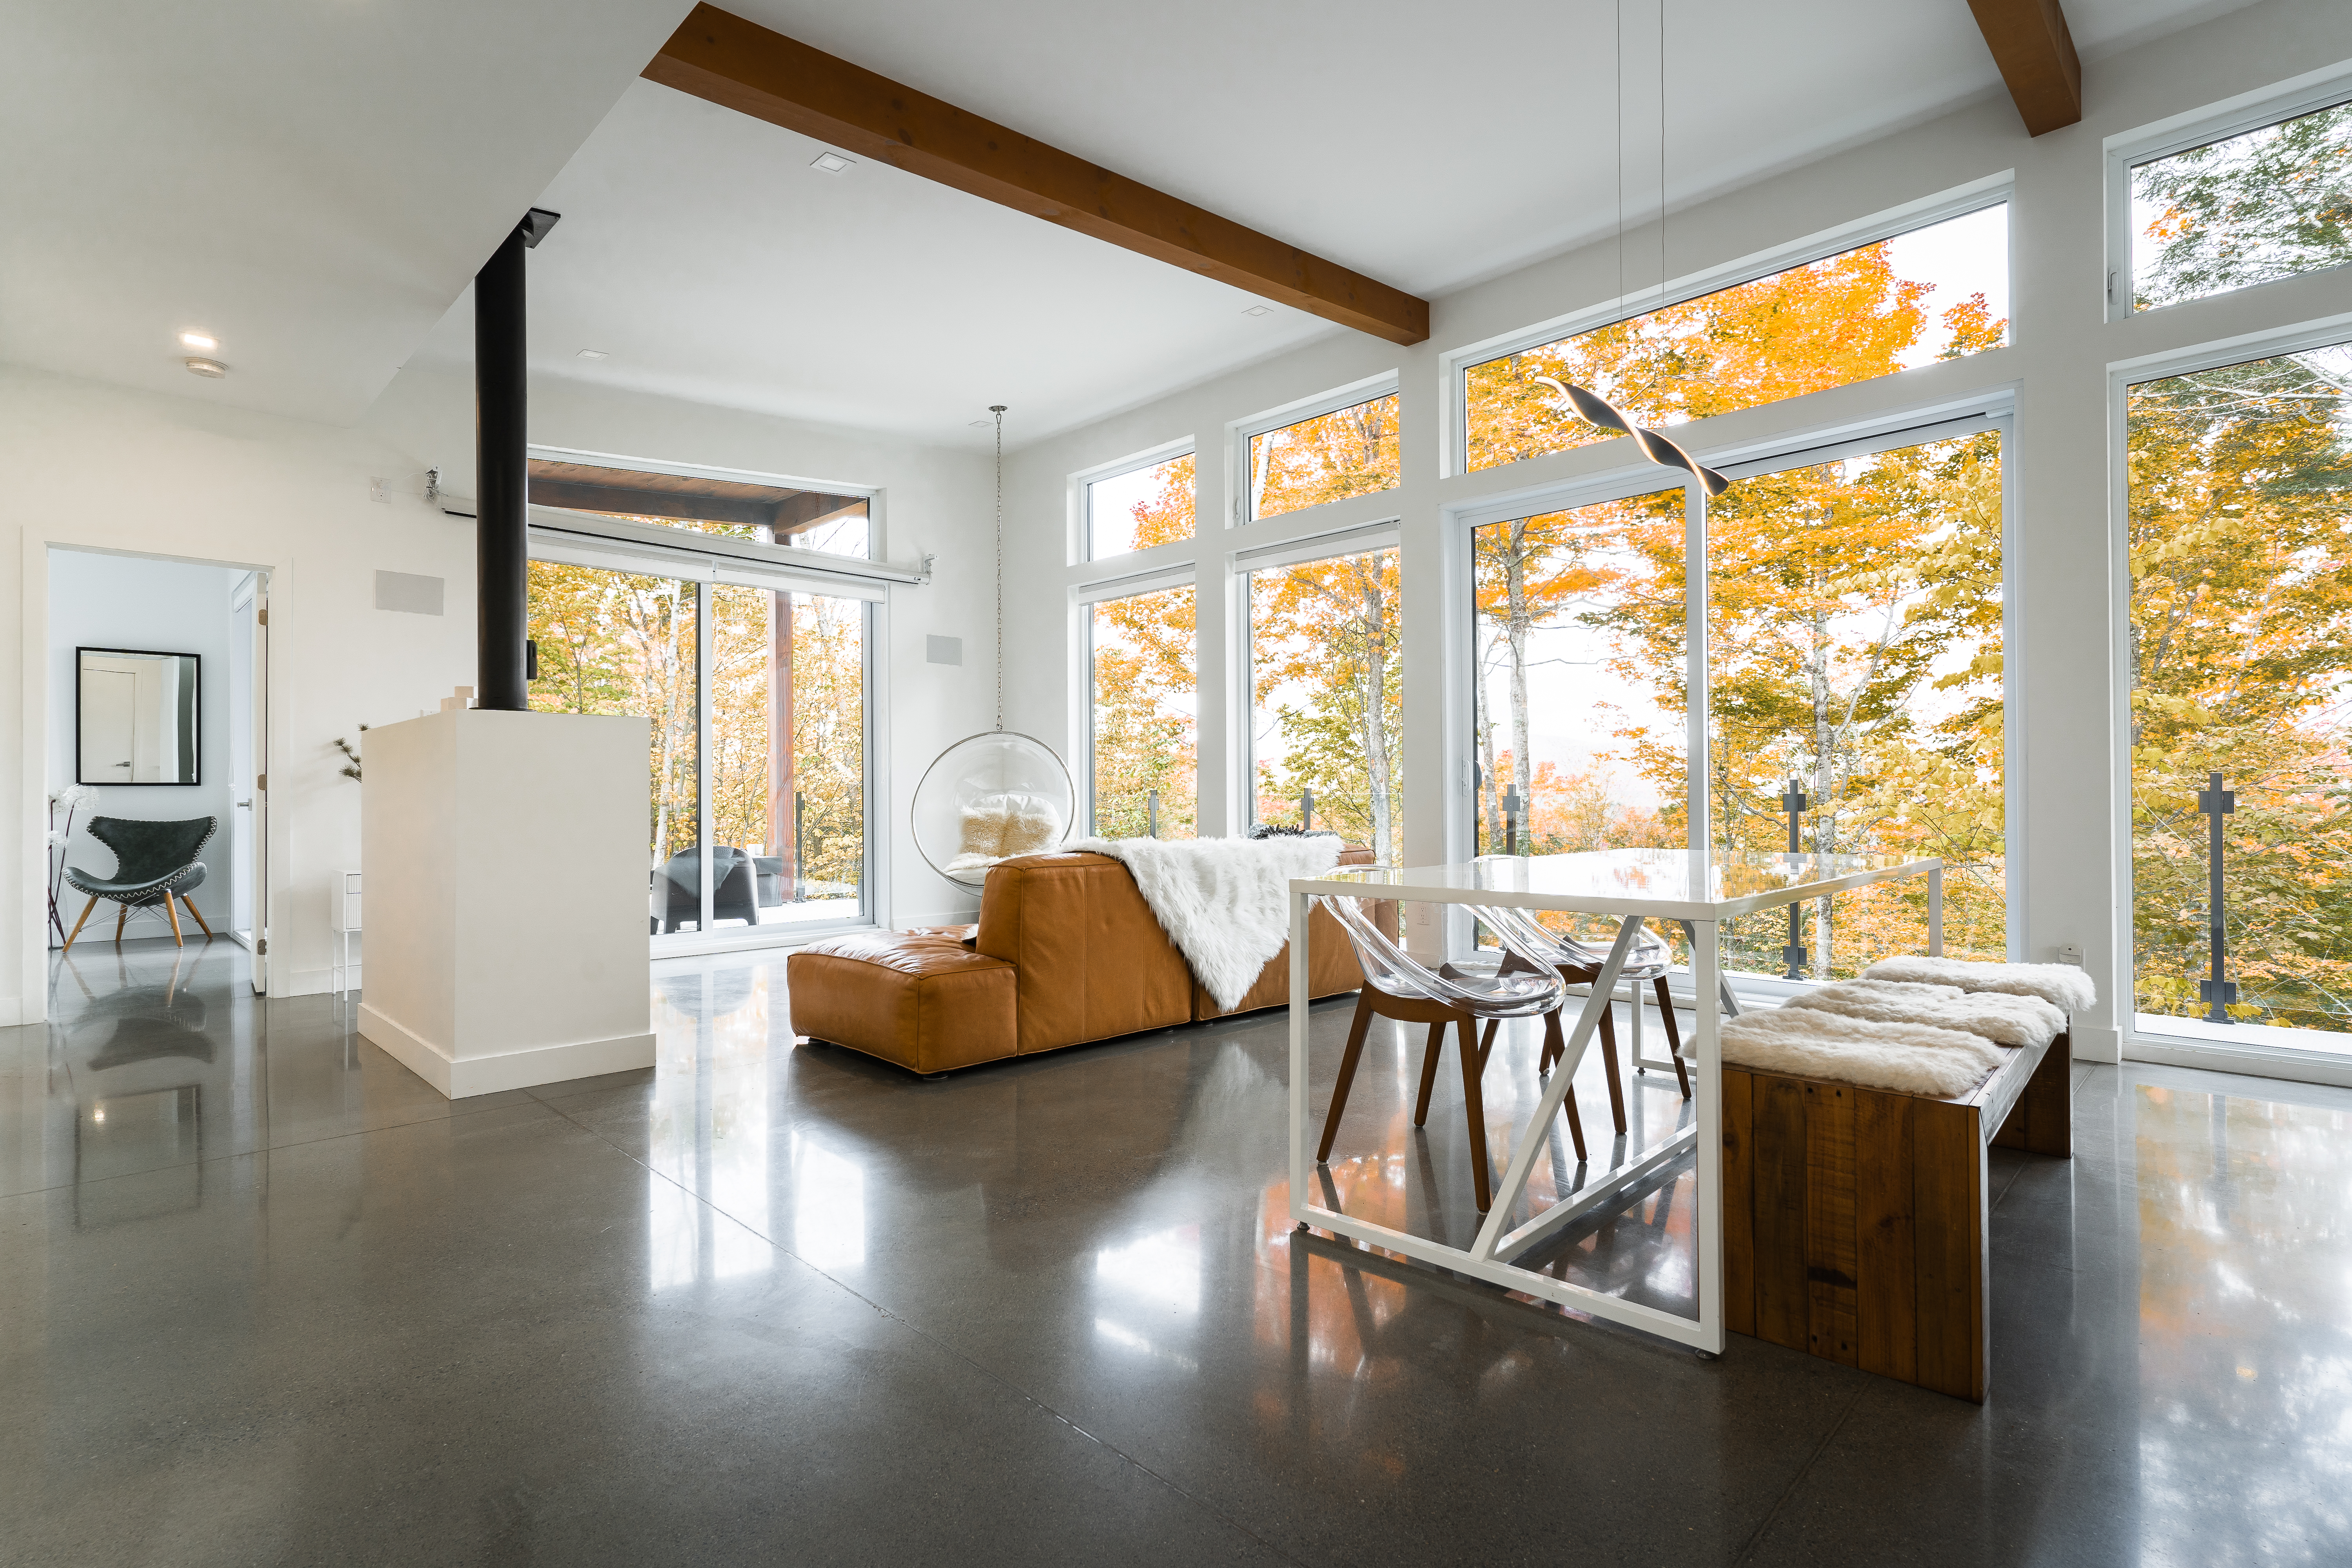 A contemporary living room in a home in Quebec.